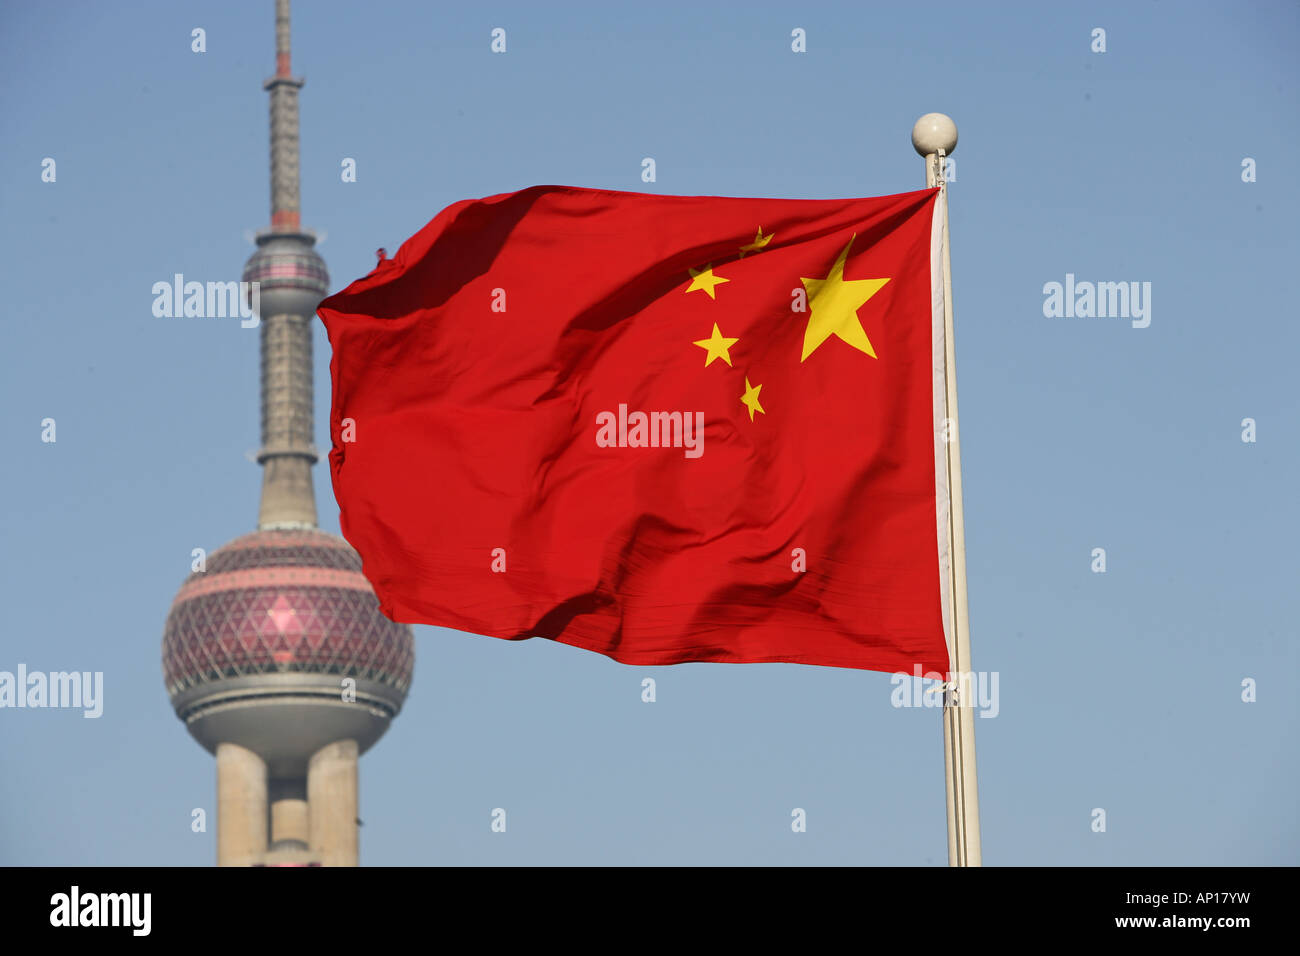 Chinesische Nationalfahne, national flag, Flagge, Nation, gelber Stern, Sterne, red star, yellow, Oriental Pearl Tower, Pudong, Stock Photo